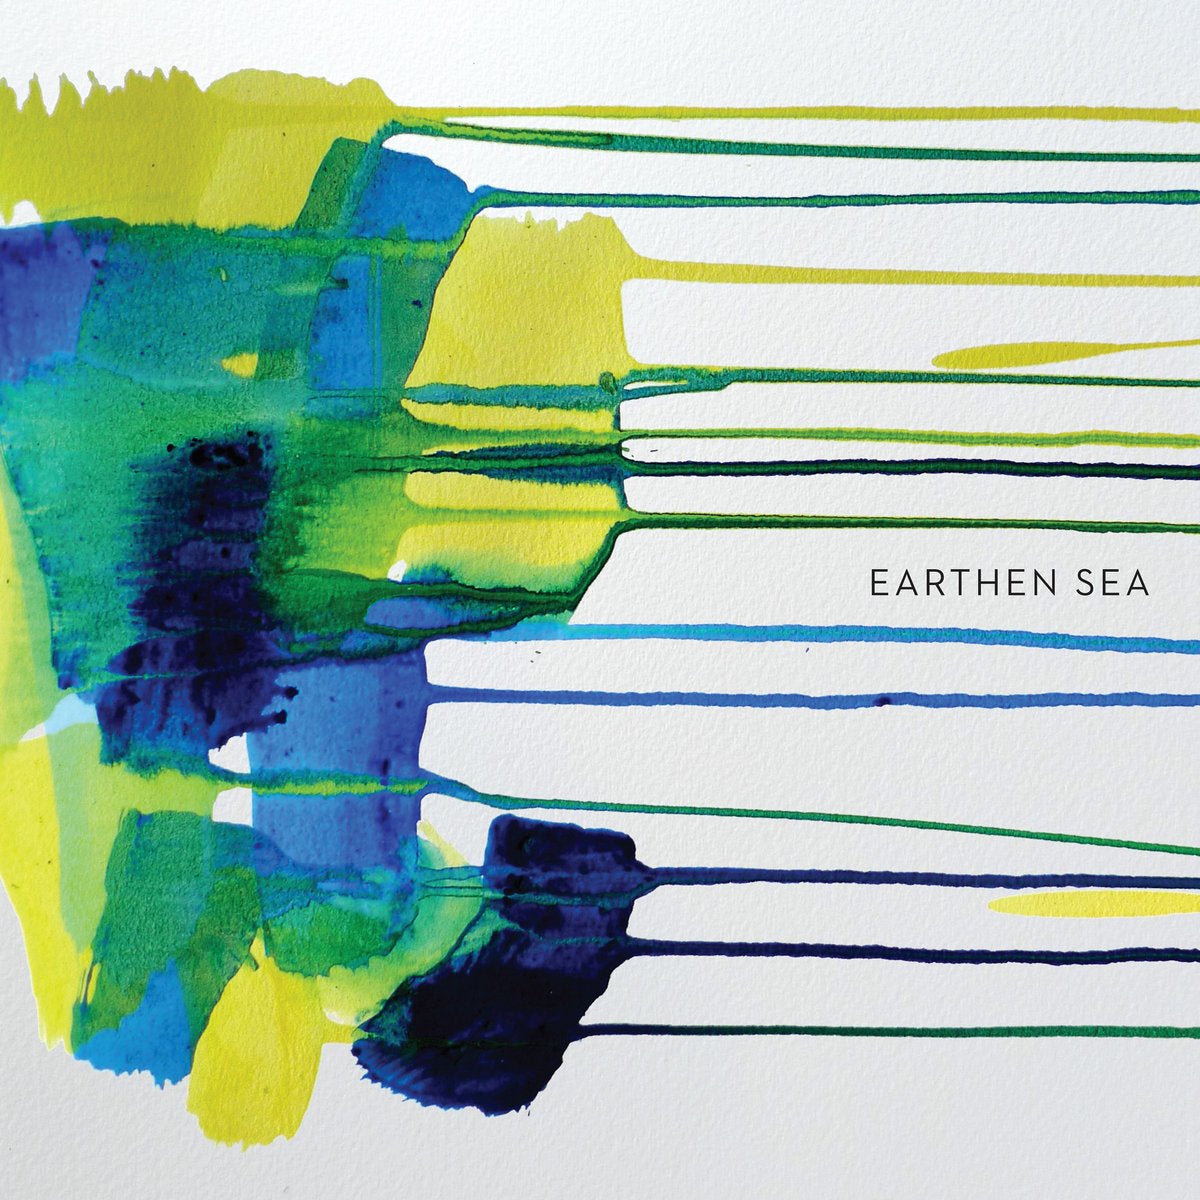 Earthen Sea - Grass And Trees - Inner Ocean Records